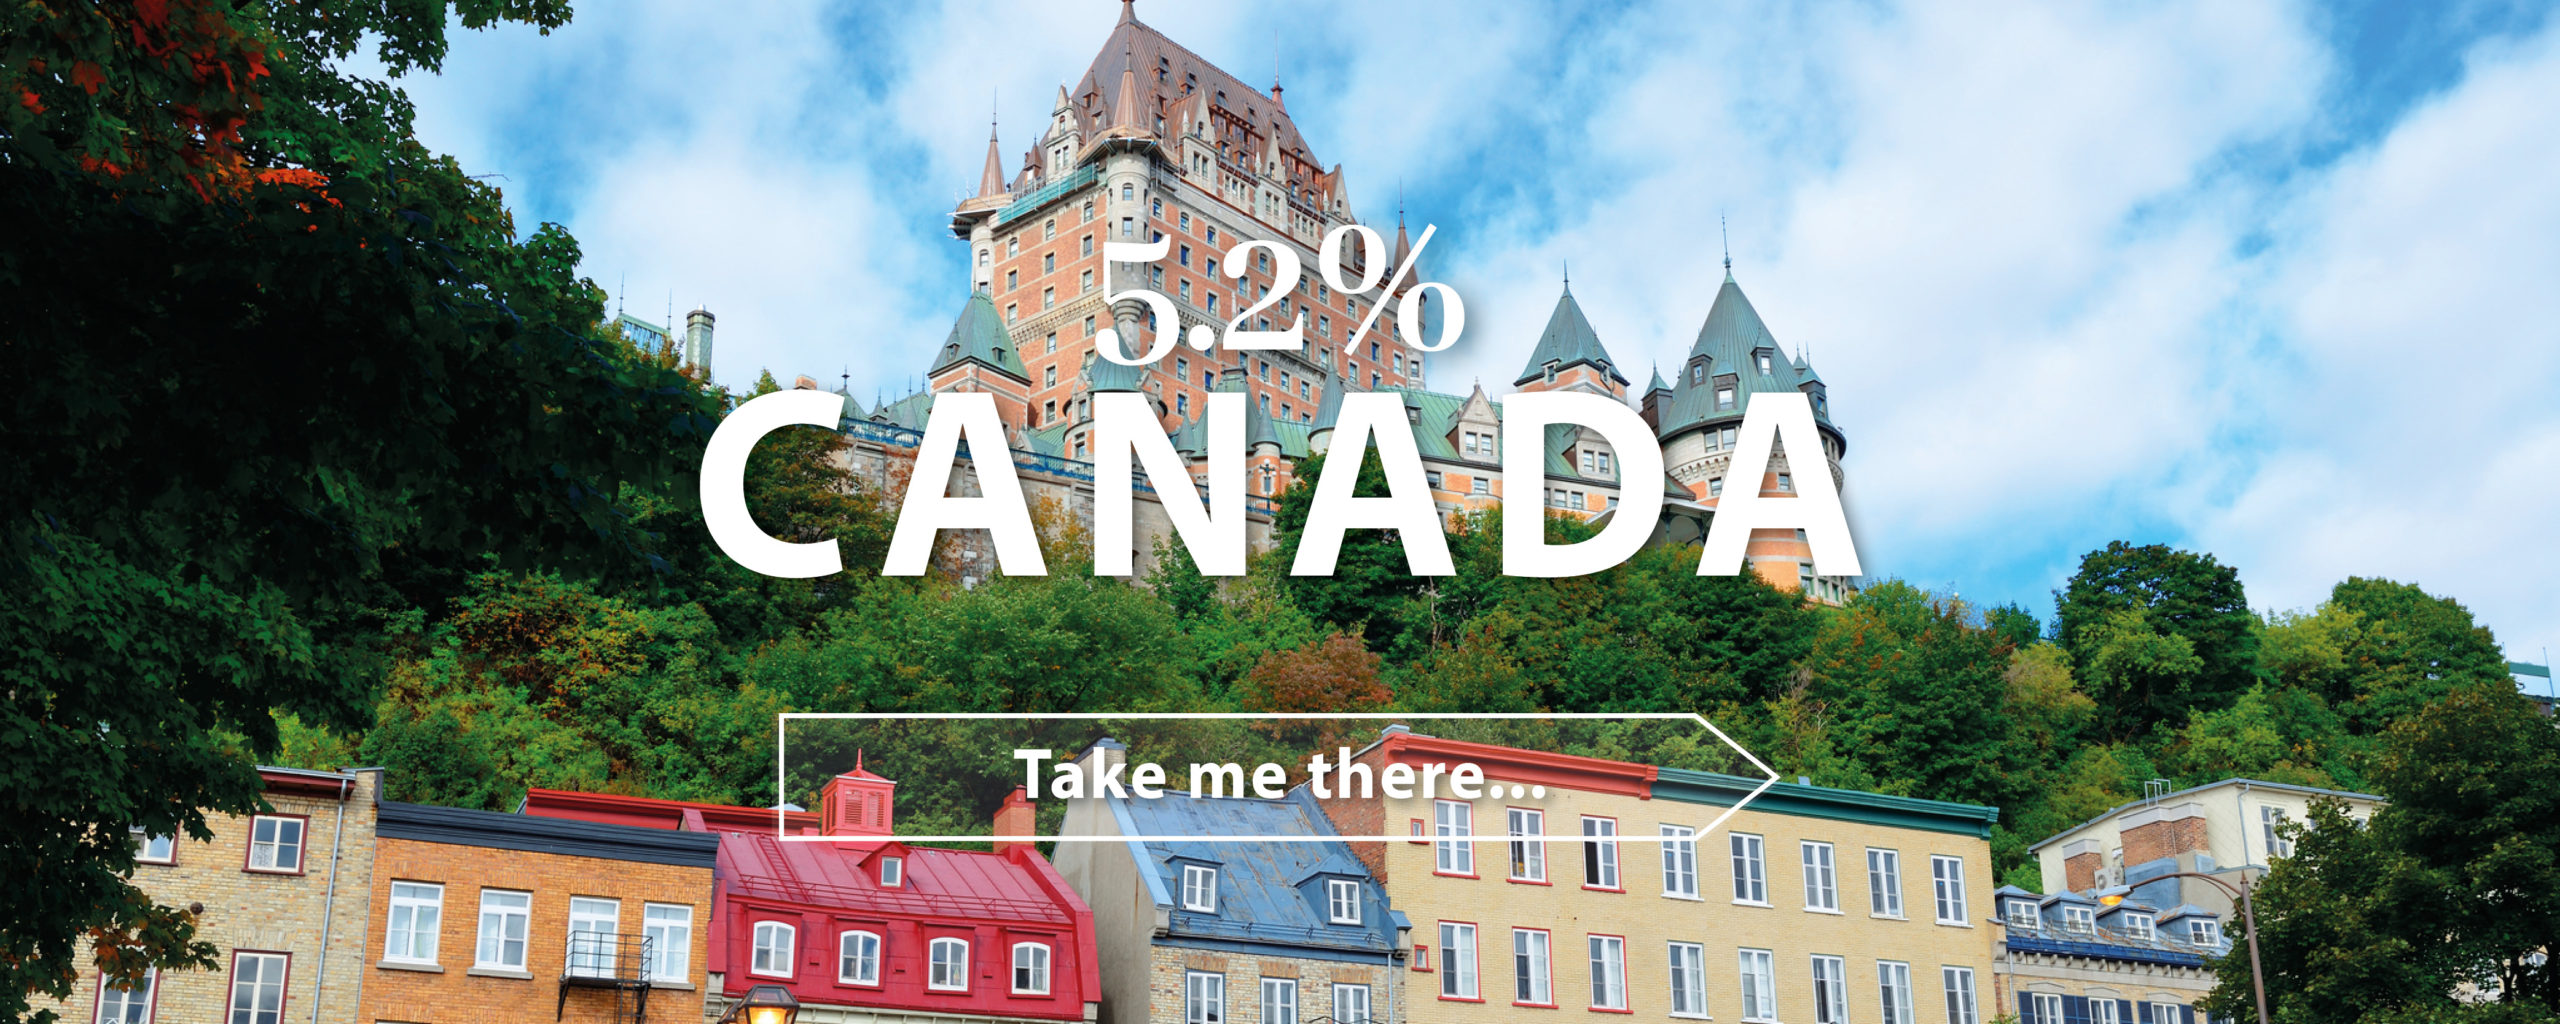 Where youre going this year_Canada